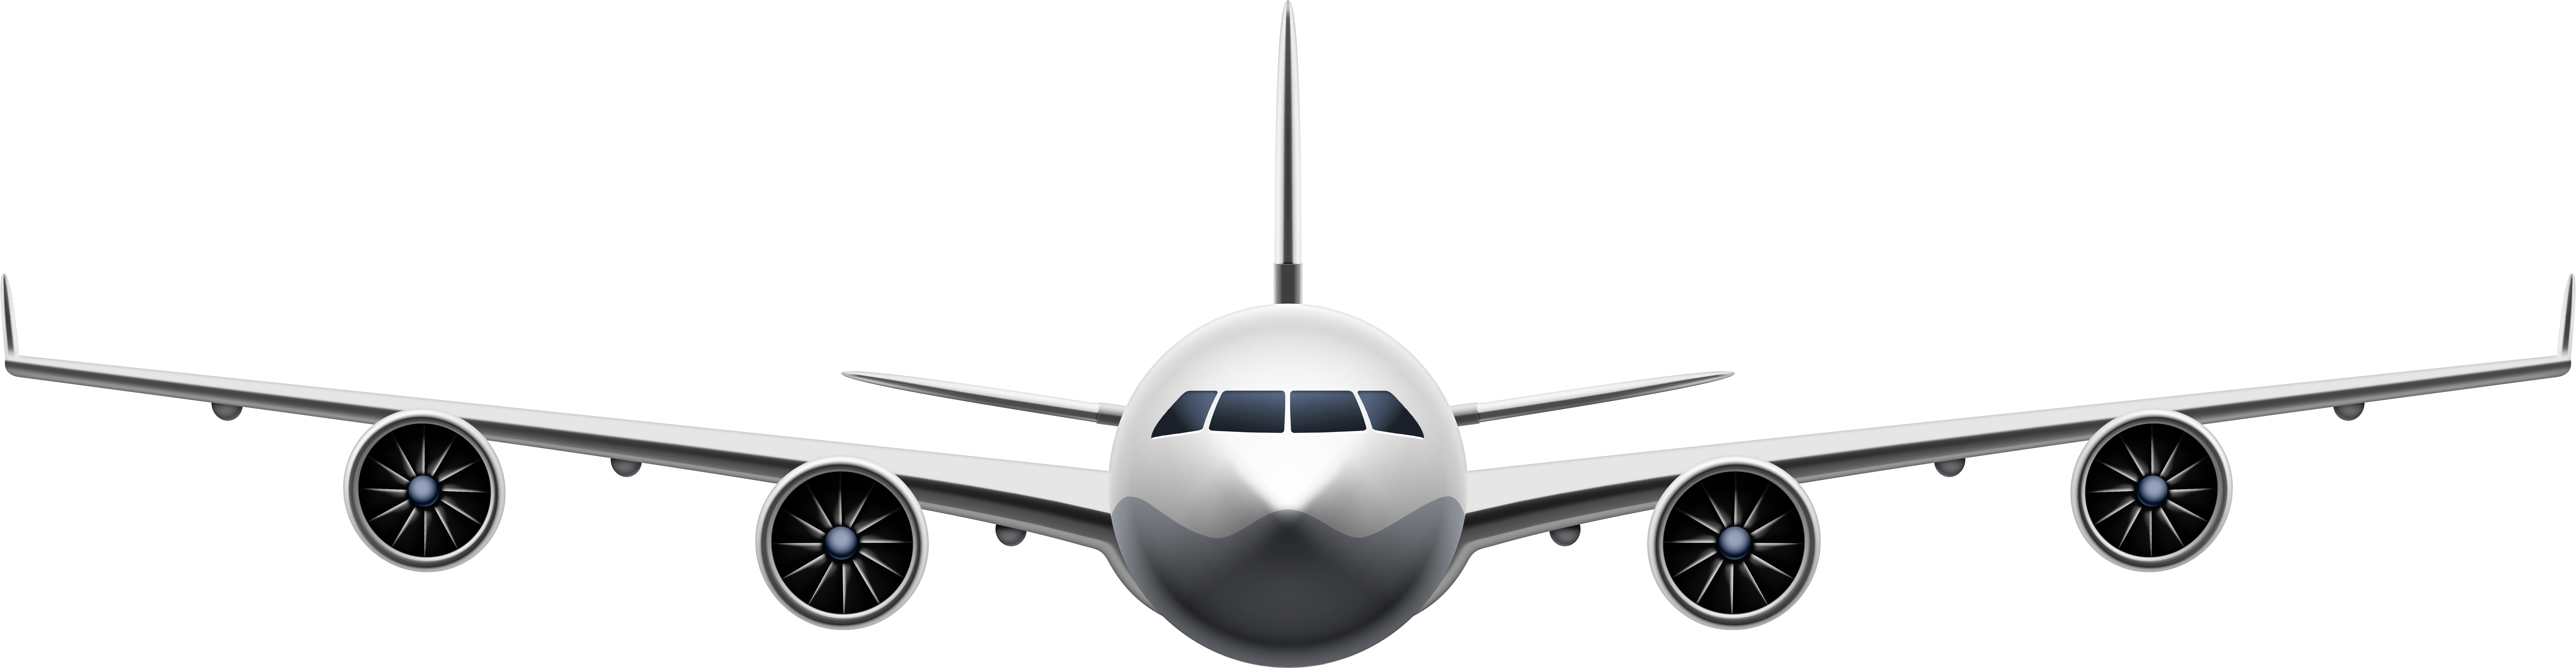 Airplane Flying PNG Image